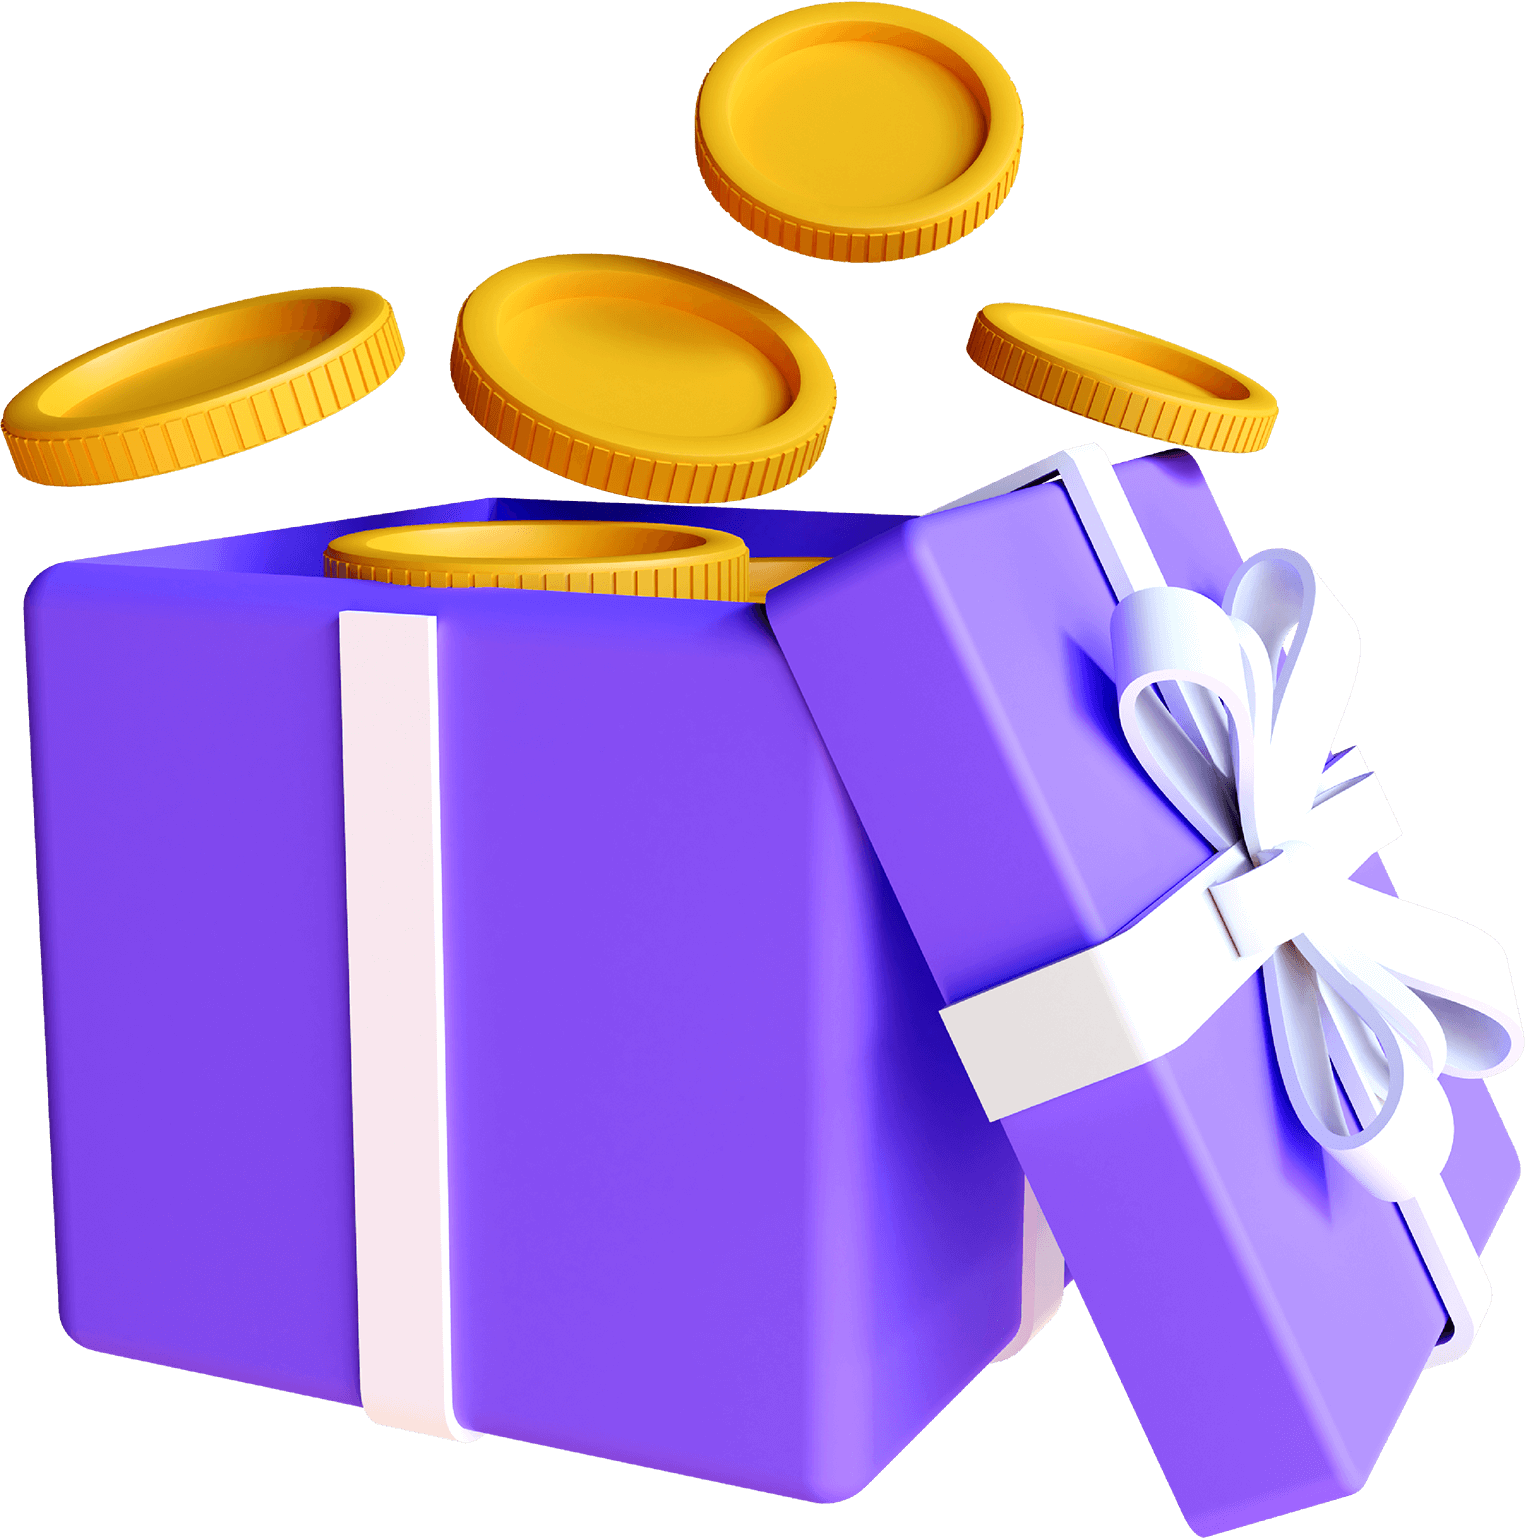 gift - Gift Card, Cryptos and E-Currency Exchange